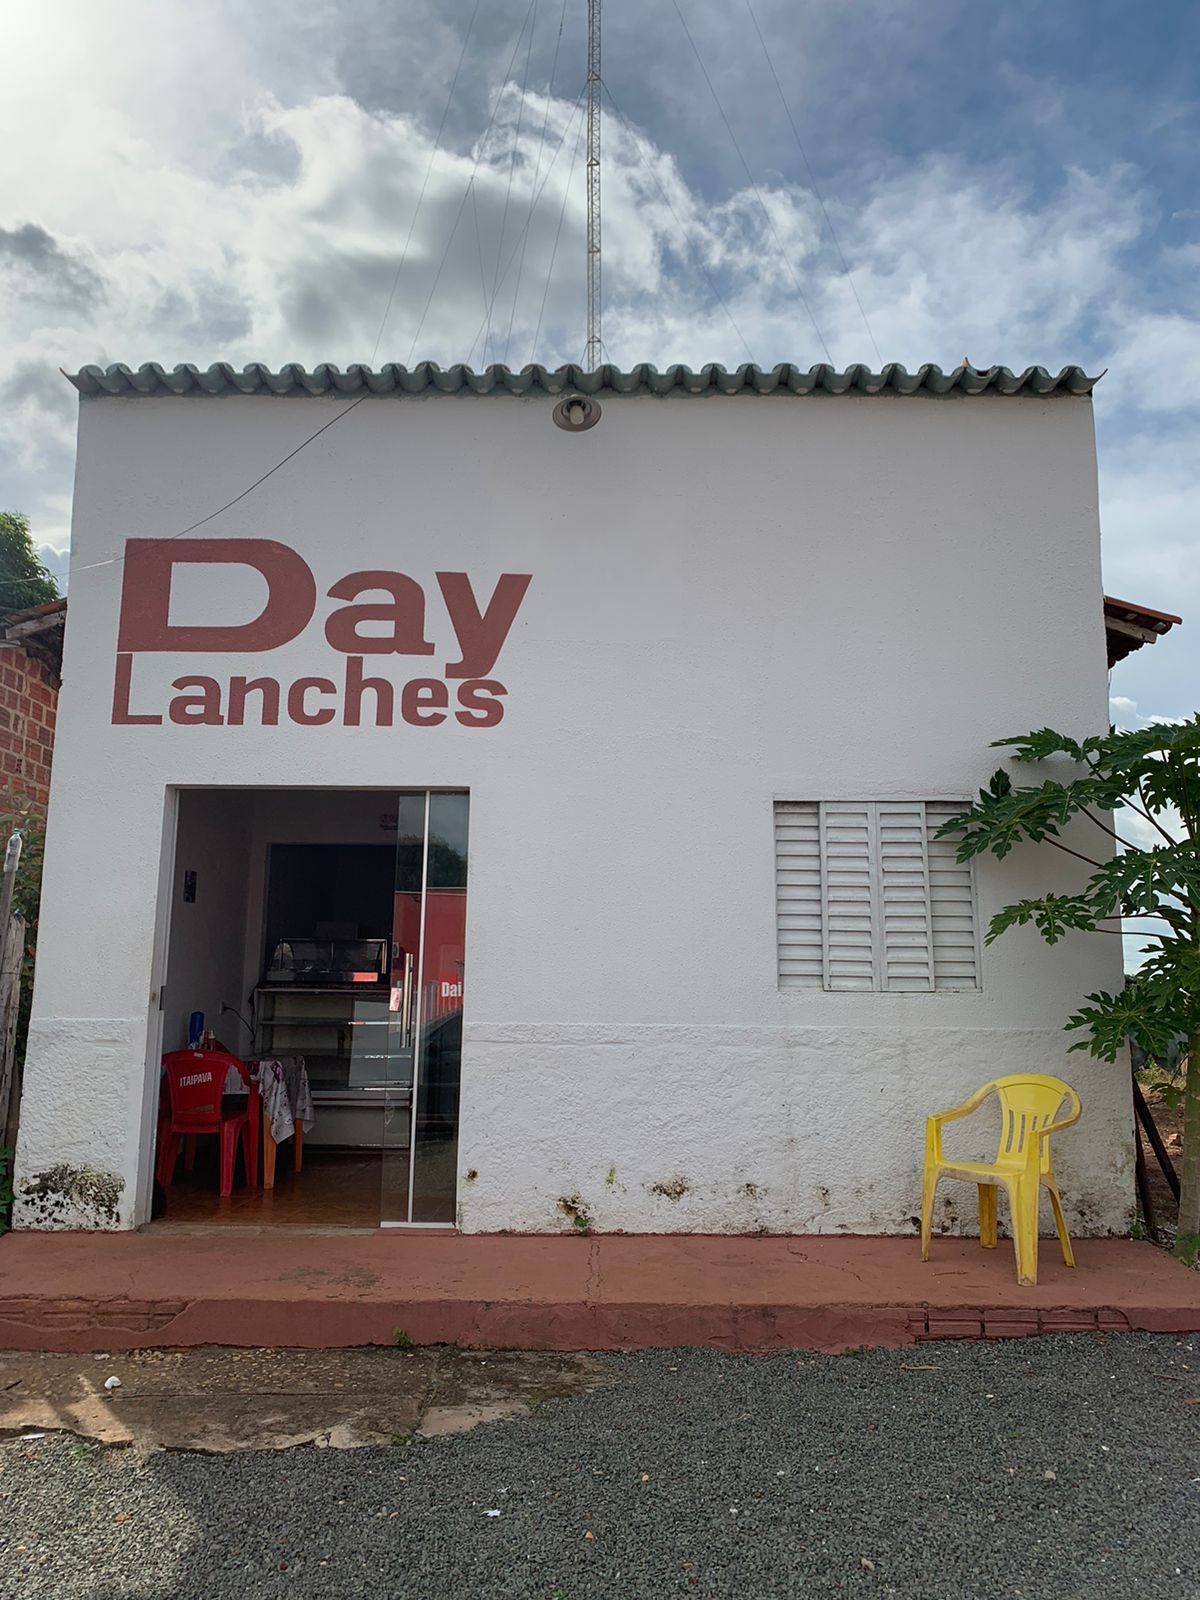 DAY LANCHES